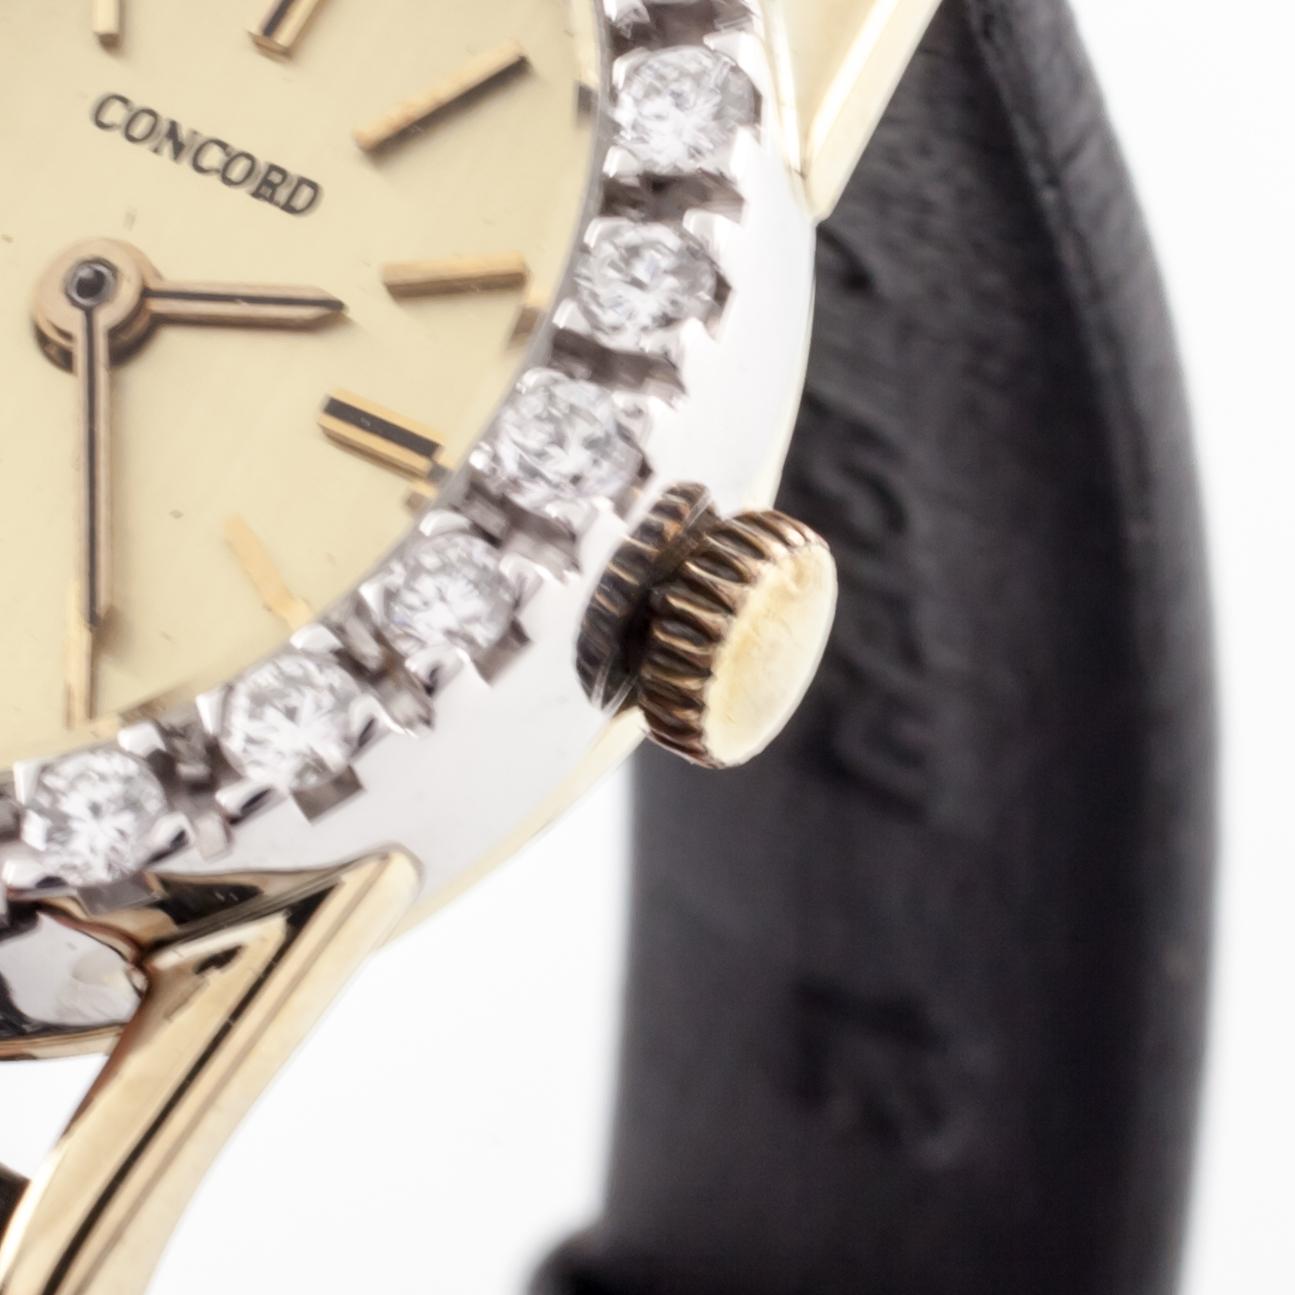 Concord 14 Karat Gold Quartz Watch with Diamond Bezel and Leather Band In Good Condition In Sherman Oaks, CA